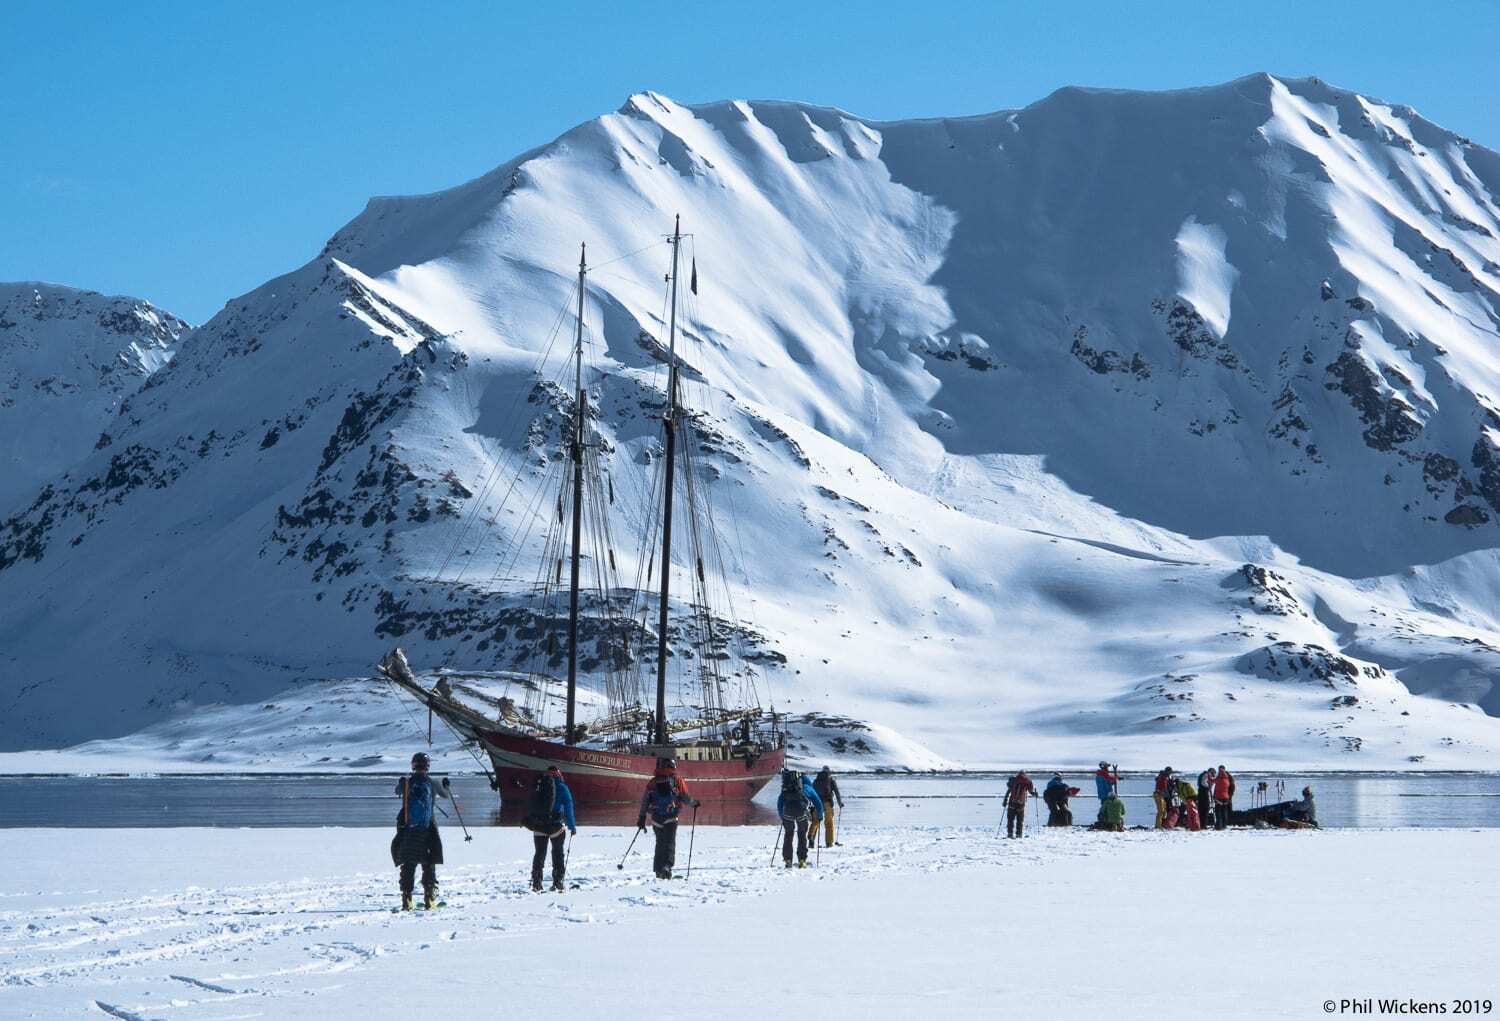 May 2019Svalbard has spectacular scenery, massive tumbling glaciers, and abundant wildlife. It also has innumerable, perfect ski peaks rising from the sea that make for some of the best skiing anywhere.